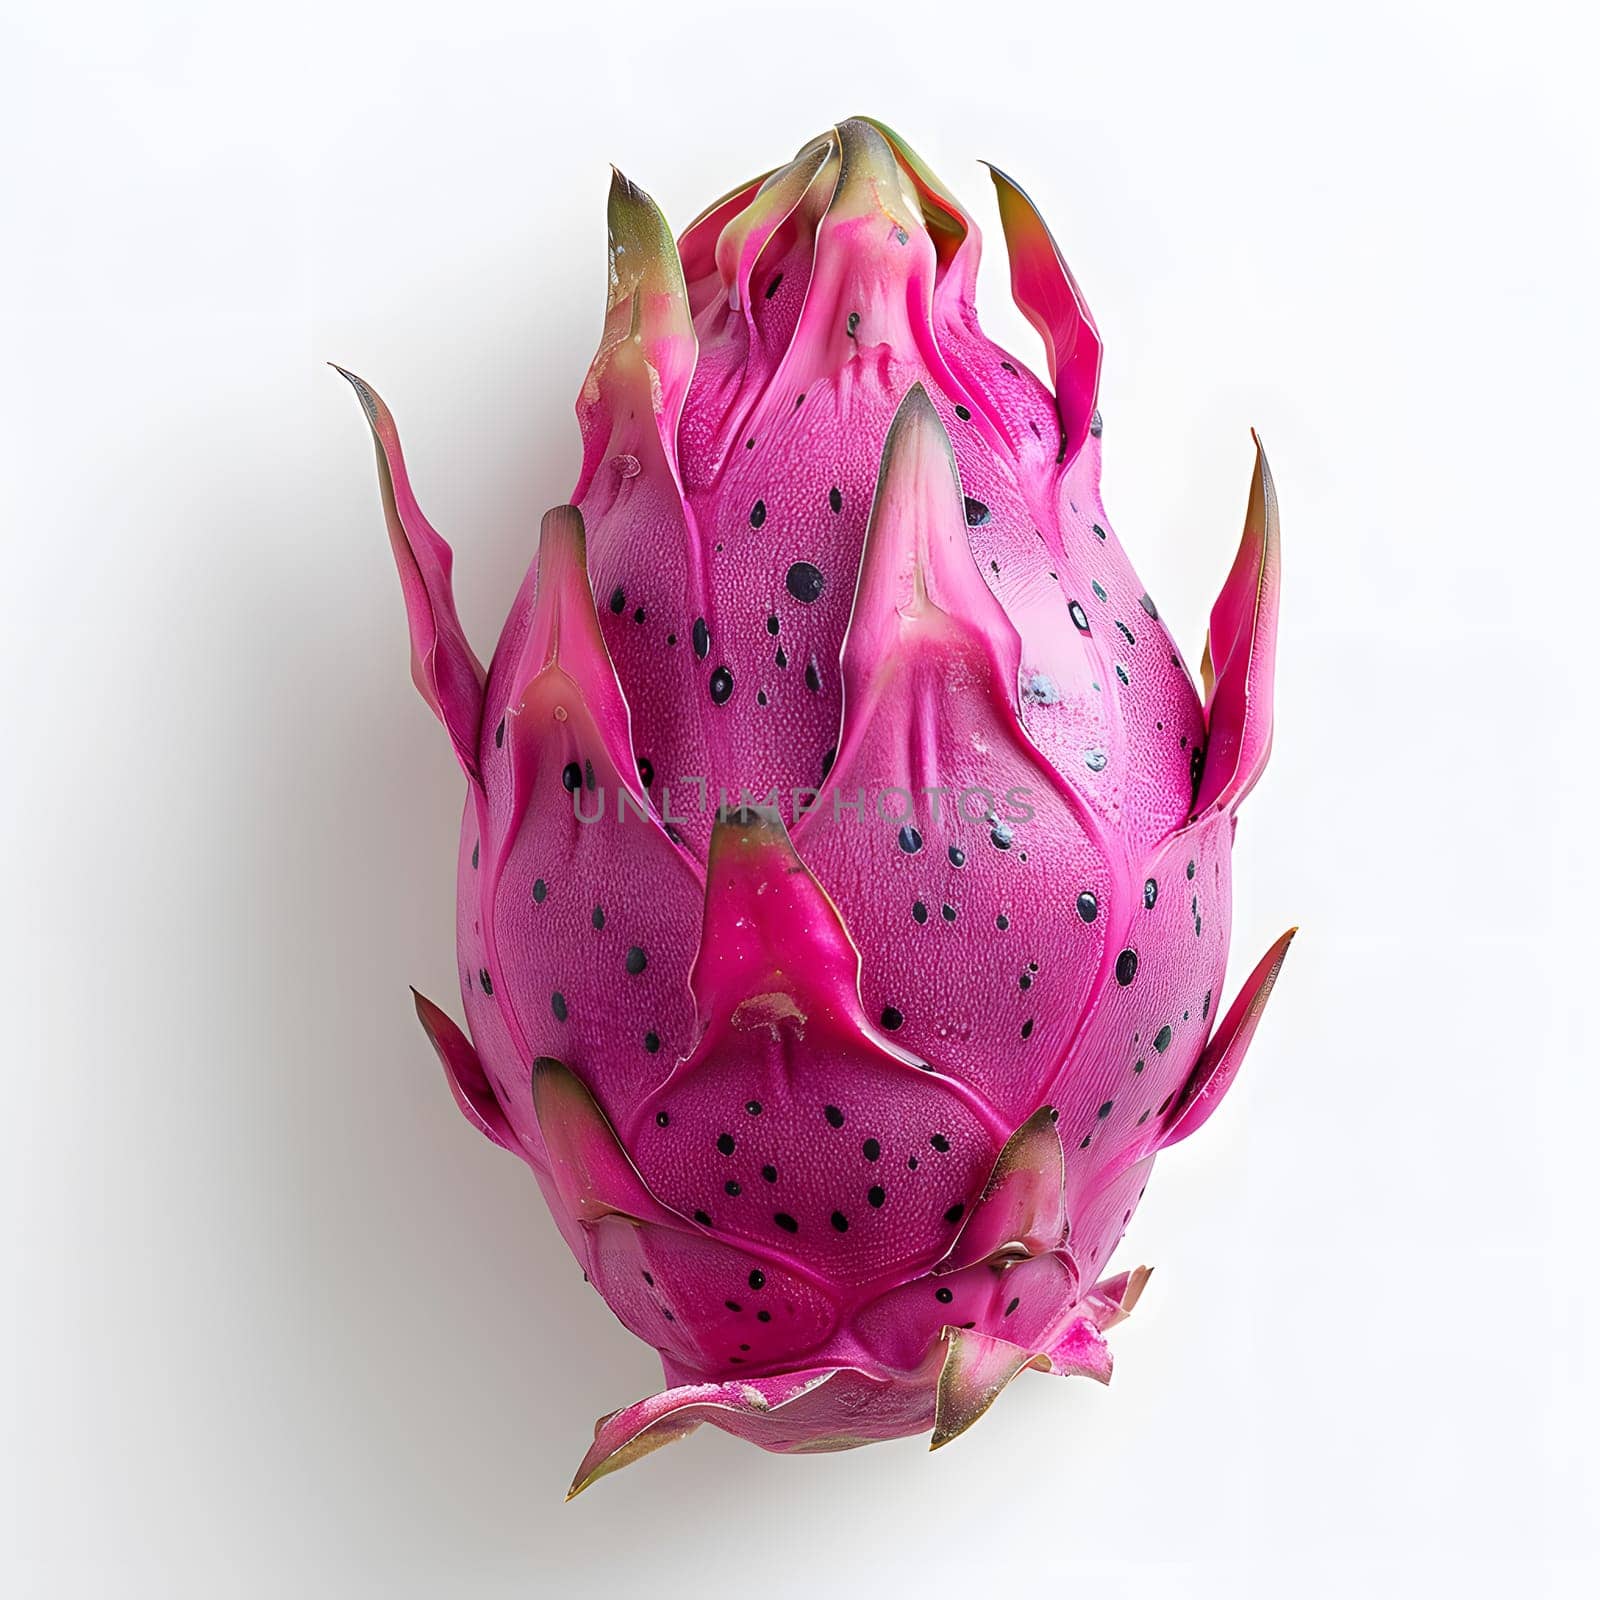 A Costa Rican pitahaya, also known as Dragonfruit or Pitahaya, is a striking fruit with vibrant pink skin and white petallike flowers, grown on a terrestrial plant